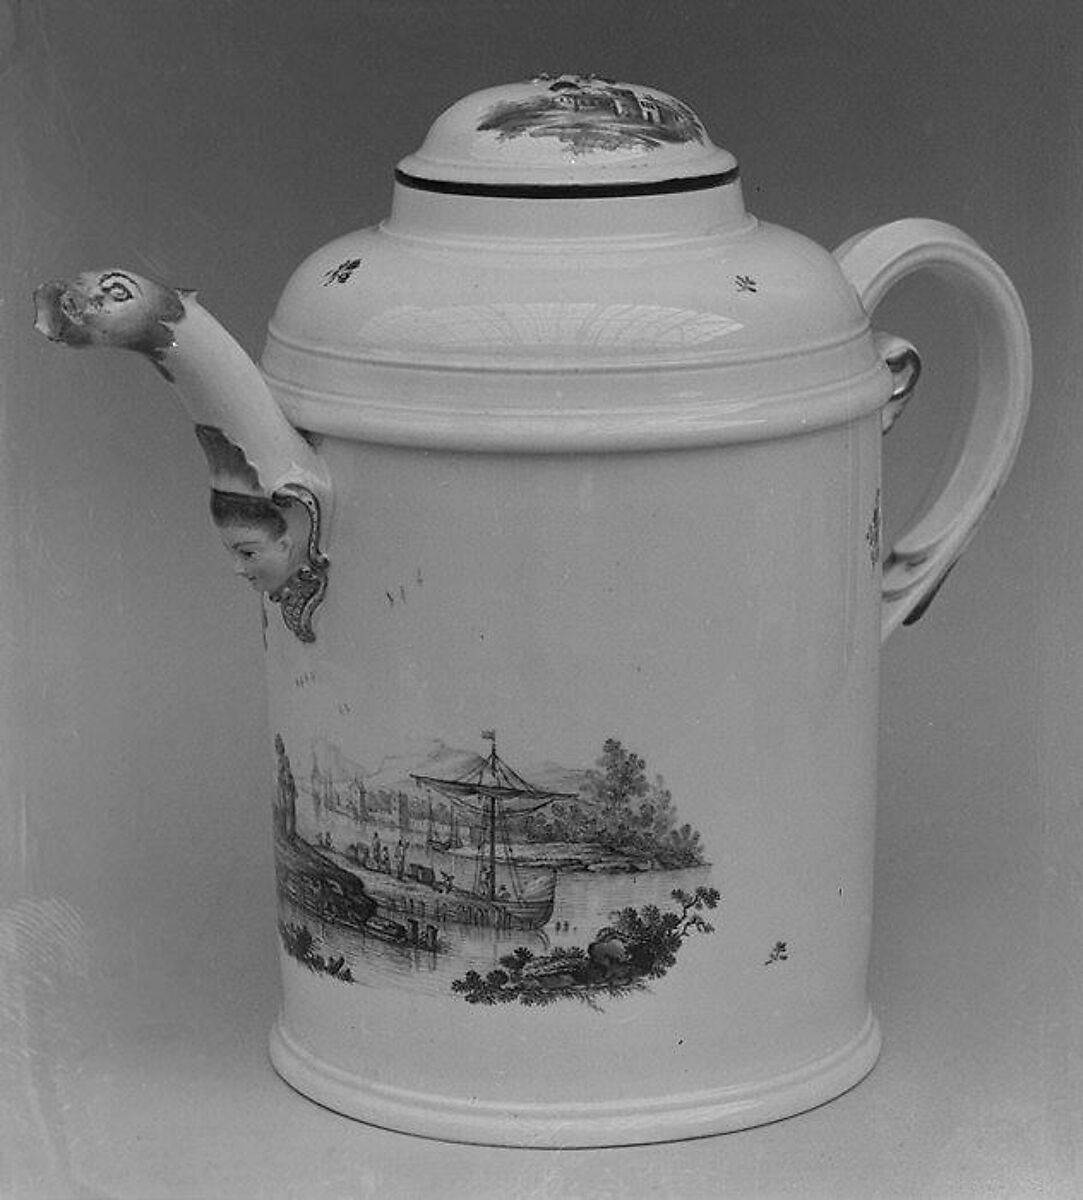 Coffeepot, Ansbach Pottery and Porcelain Manufactory (German, 1758–1860), Hard-paste porcelain, German, Ansbach (Bruckberg) 